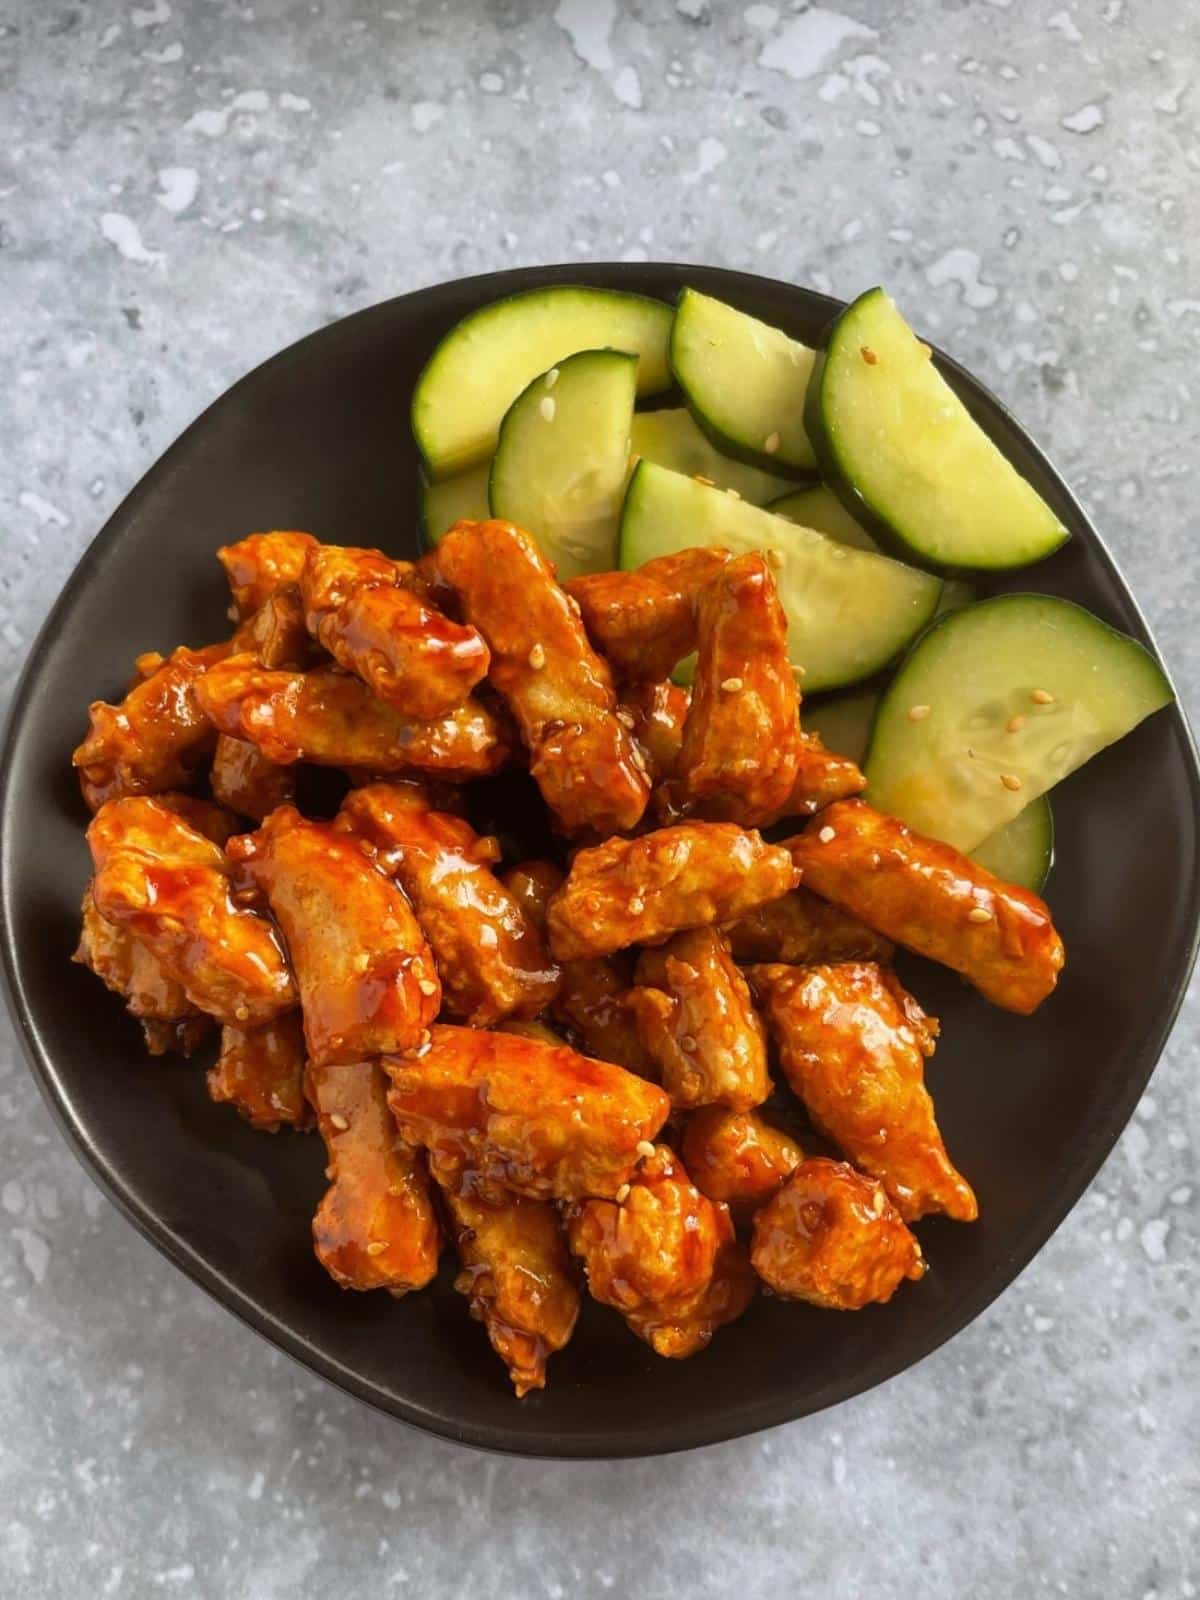 Vegan korean fried chicken with a side of cucumber.